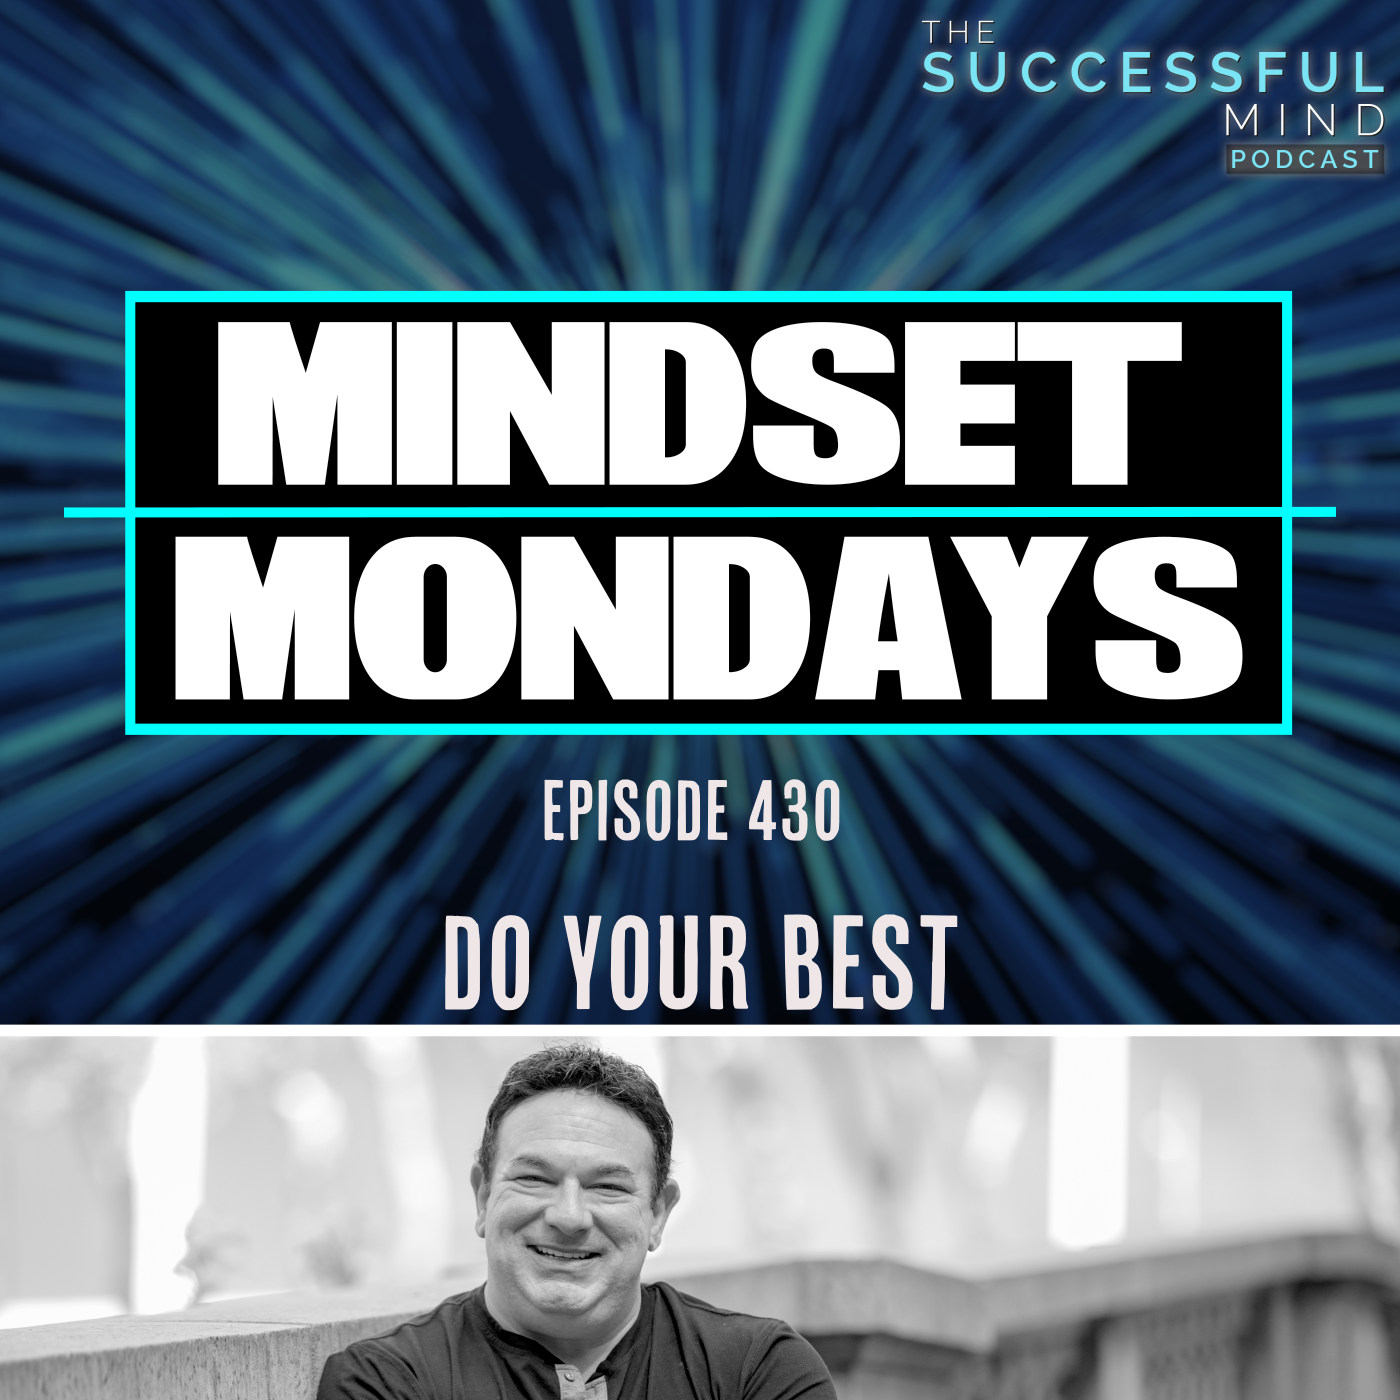 The Successful Mind Podcast - Episode 430 - Do Your Best